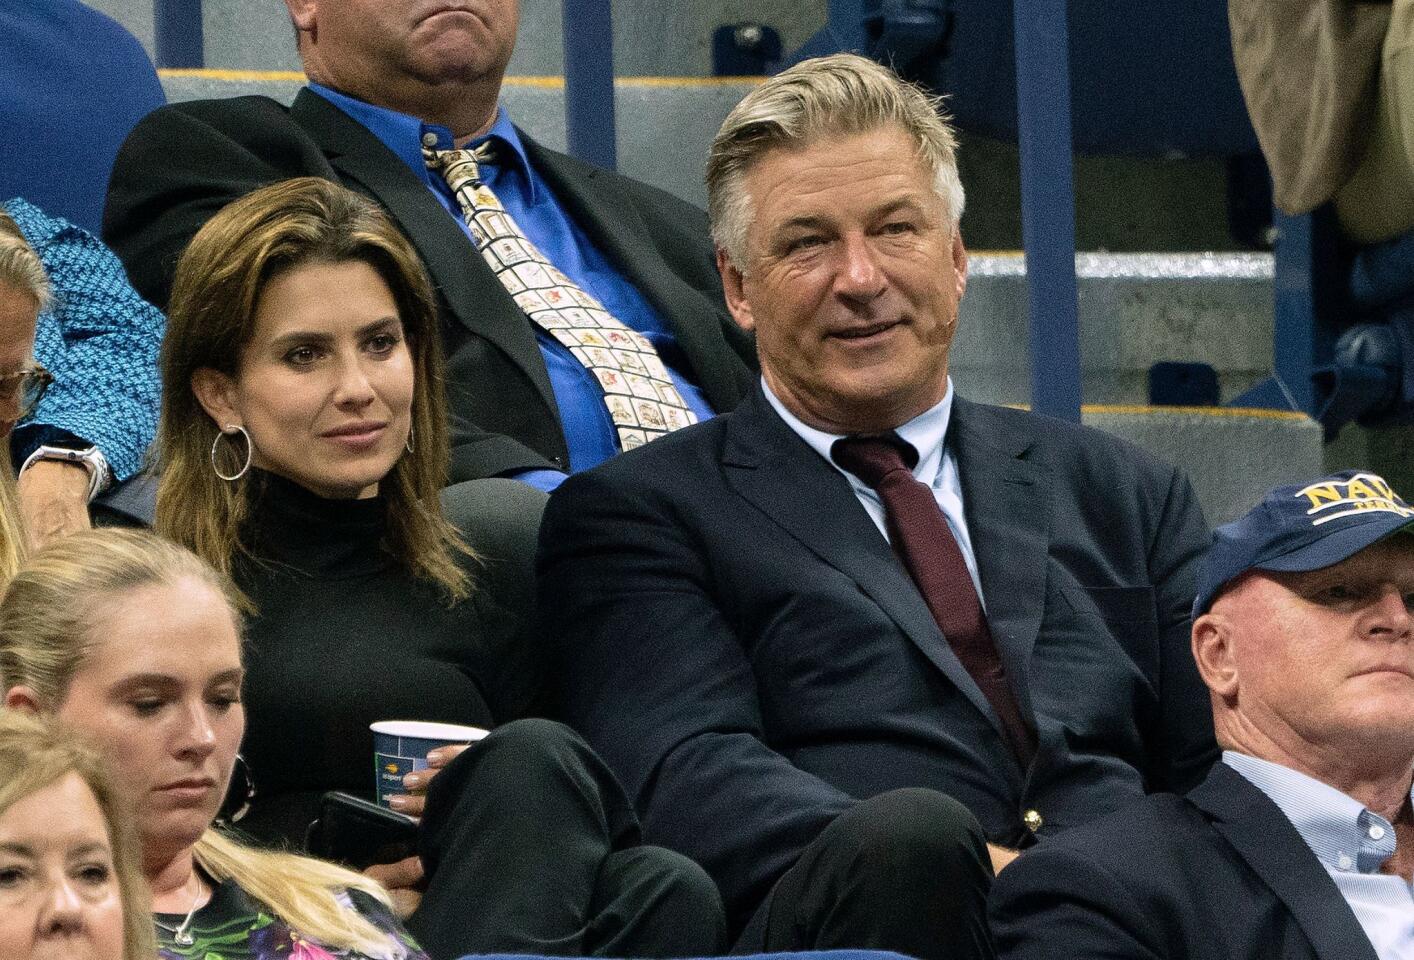 Actor Alec Baldwin and his wife Hilaria watch the match between Rafael Nadal of Spain and Marin Cilic of Croatia during their Round Four Men's Singles match at the 2019 U.S. Open at the USTA Billie Jean King National Tennis Center in New York on Sept. 2, 2019.